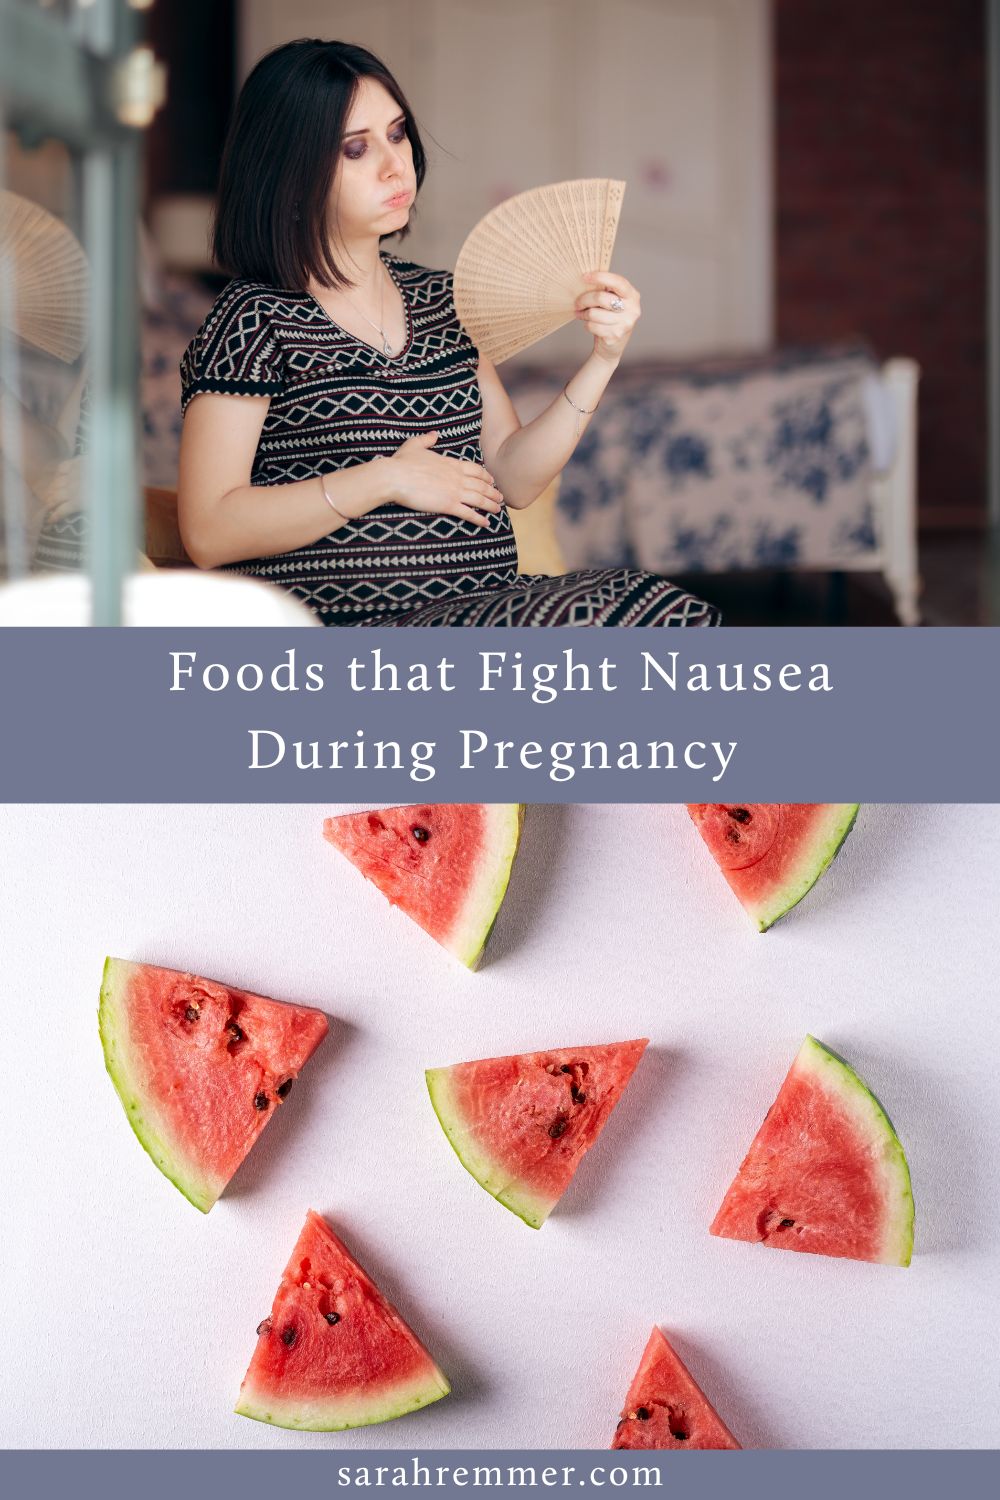 Nausea and vomiting are common symptoms experienced during pregnancy. Here is a list of foods that help to fight nausea during pregnancy.